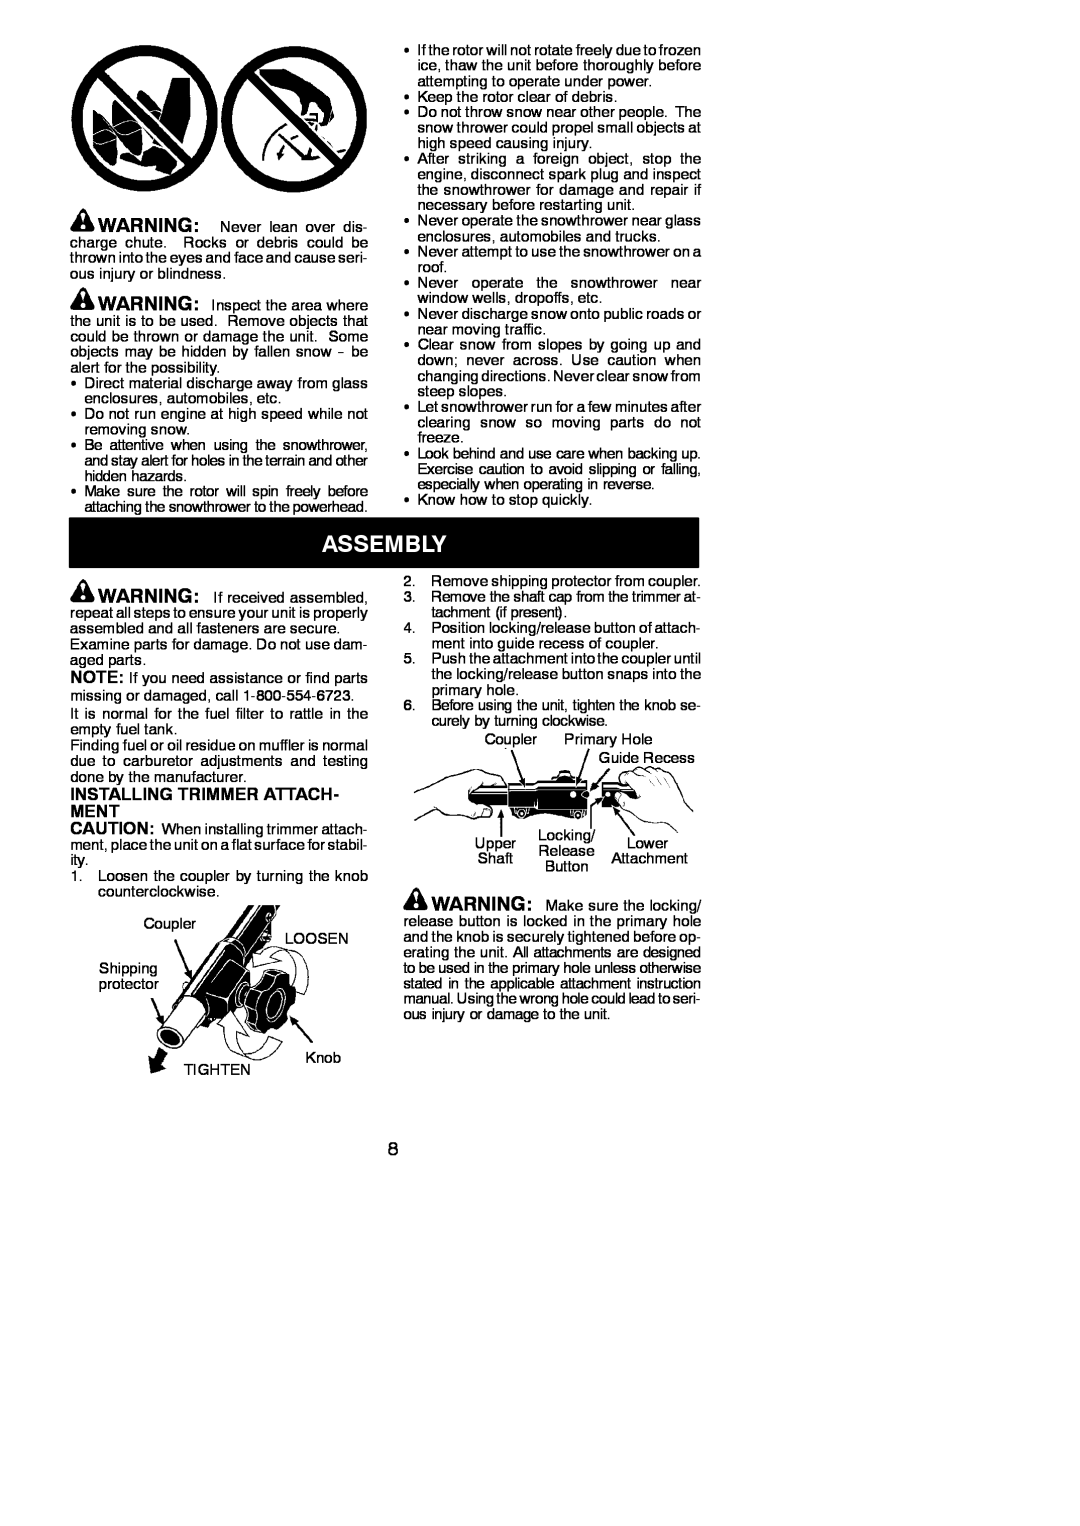 Poulan 545177328 instruction manual Assembly, Installing Trimmer Attach- Ment 